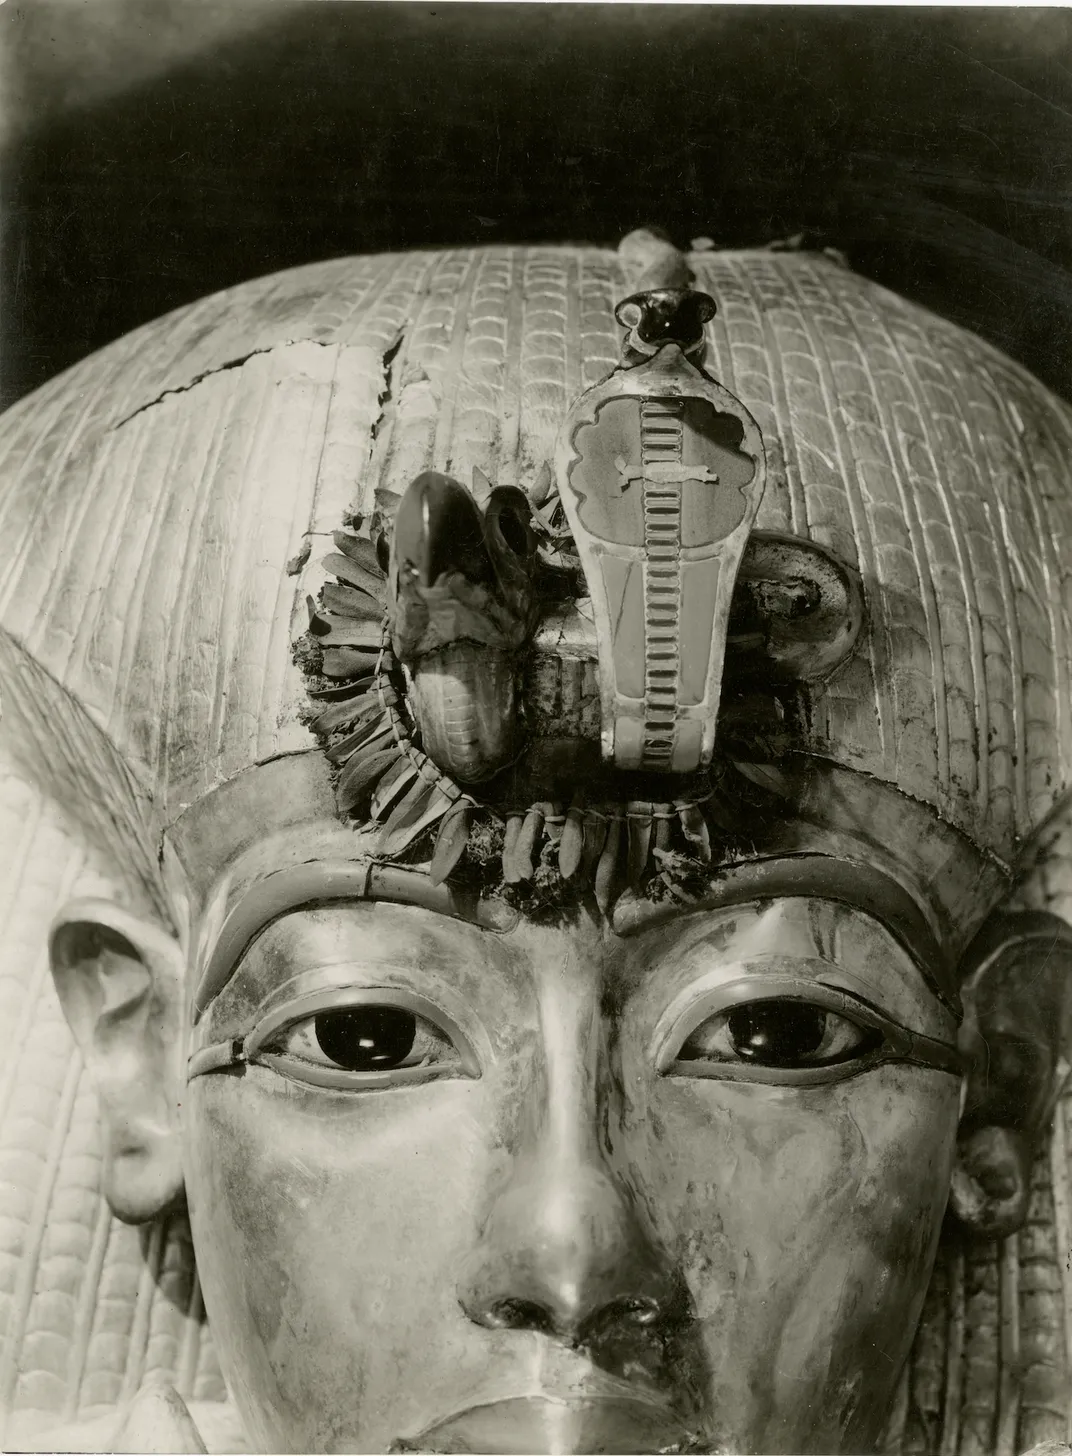 A small garland of cornflowers and olive leaves, on the          royal insignia of cobra and vulture on the forehead of          Tutankhamun's outer coffin